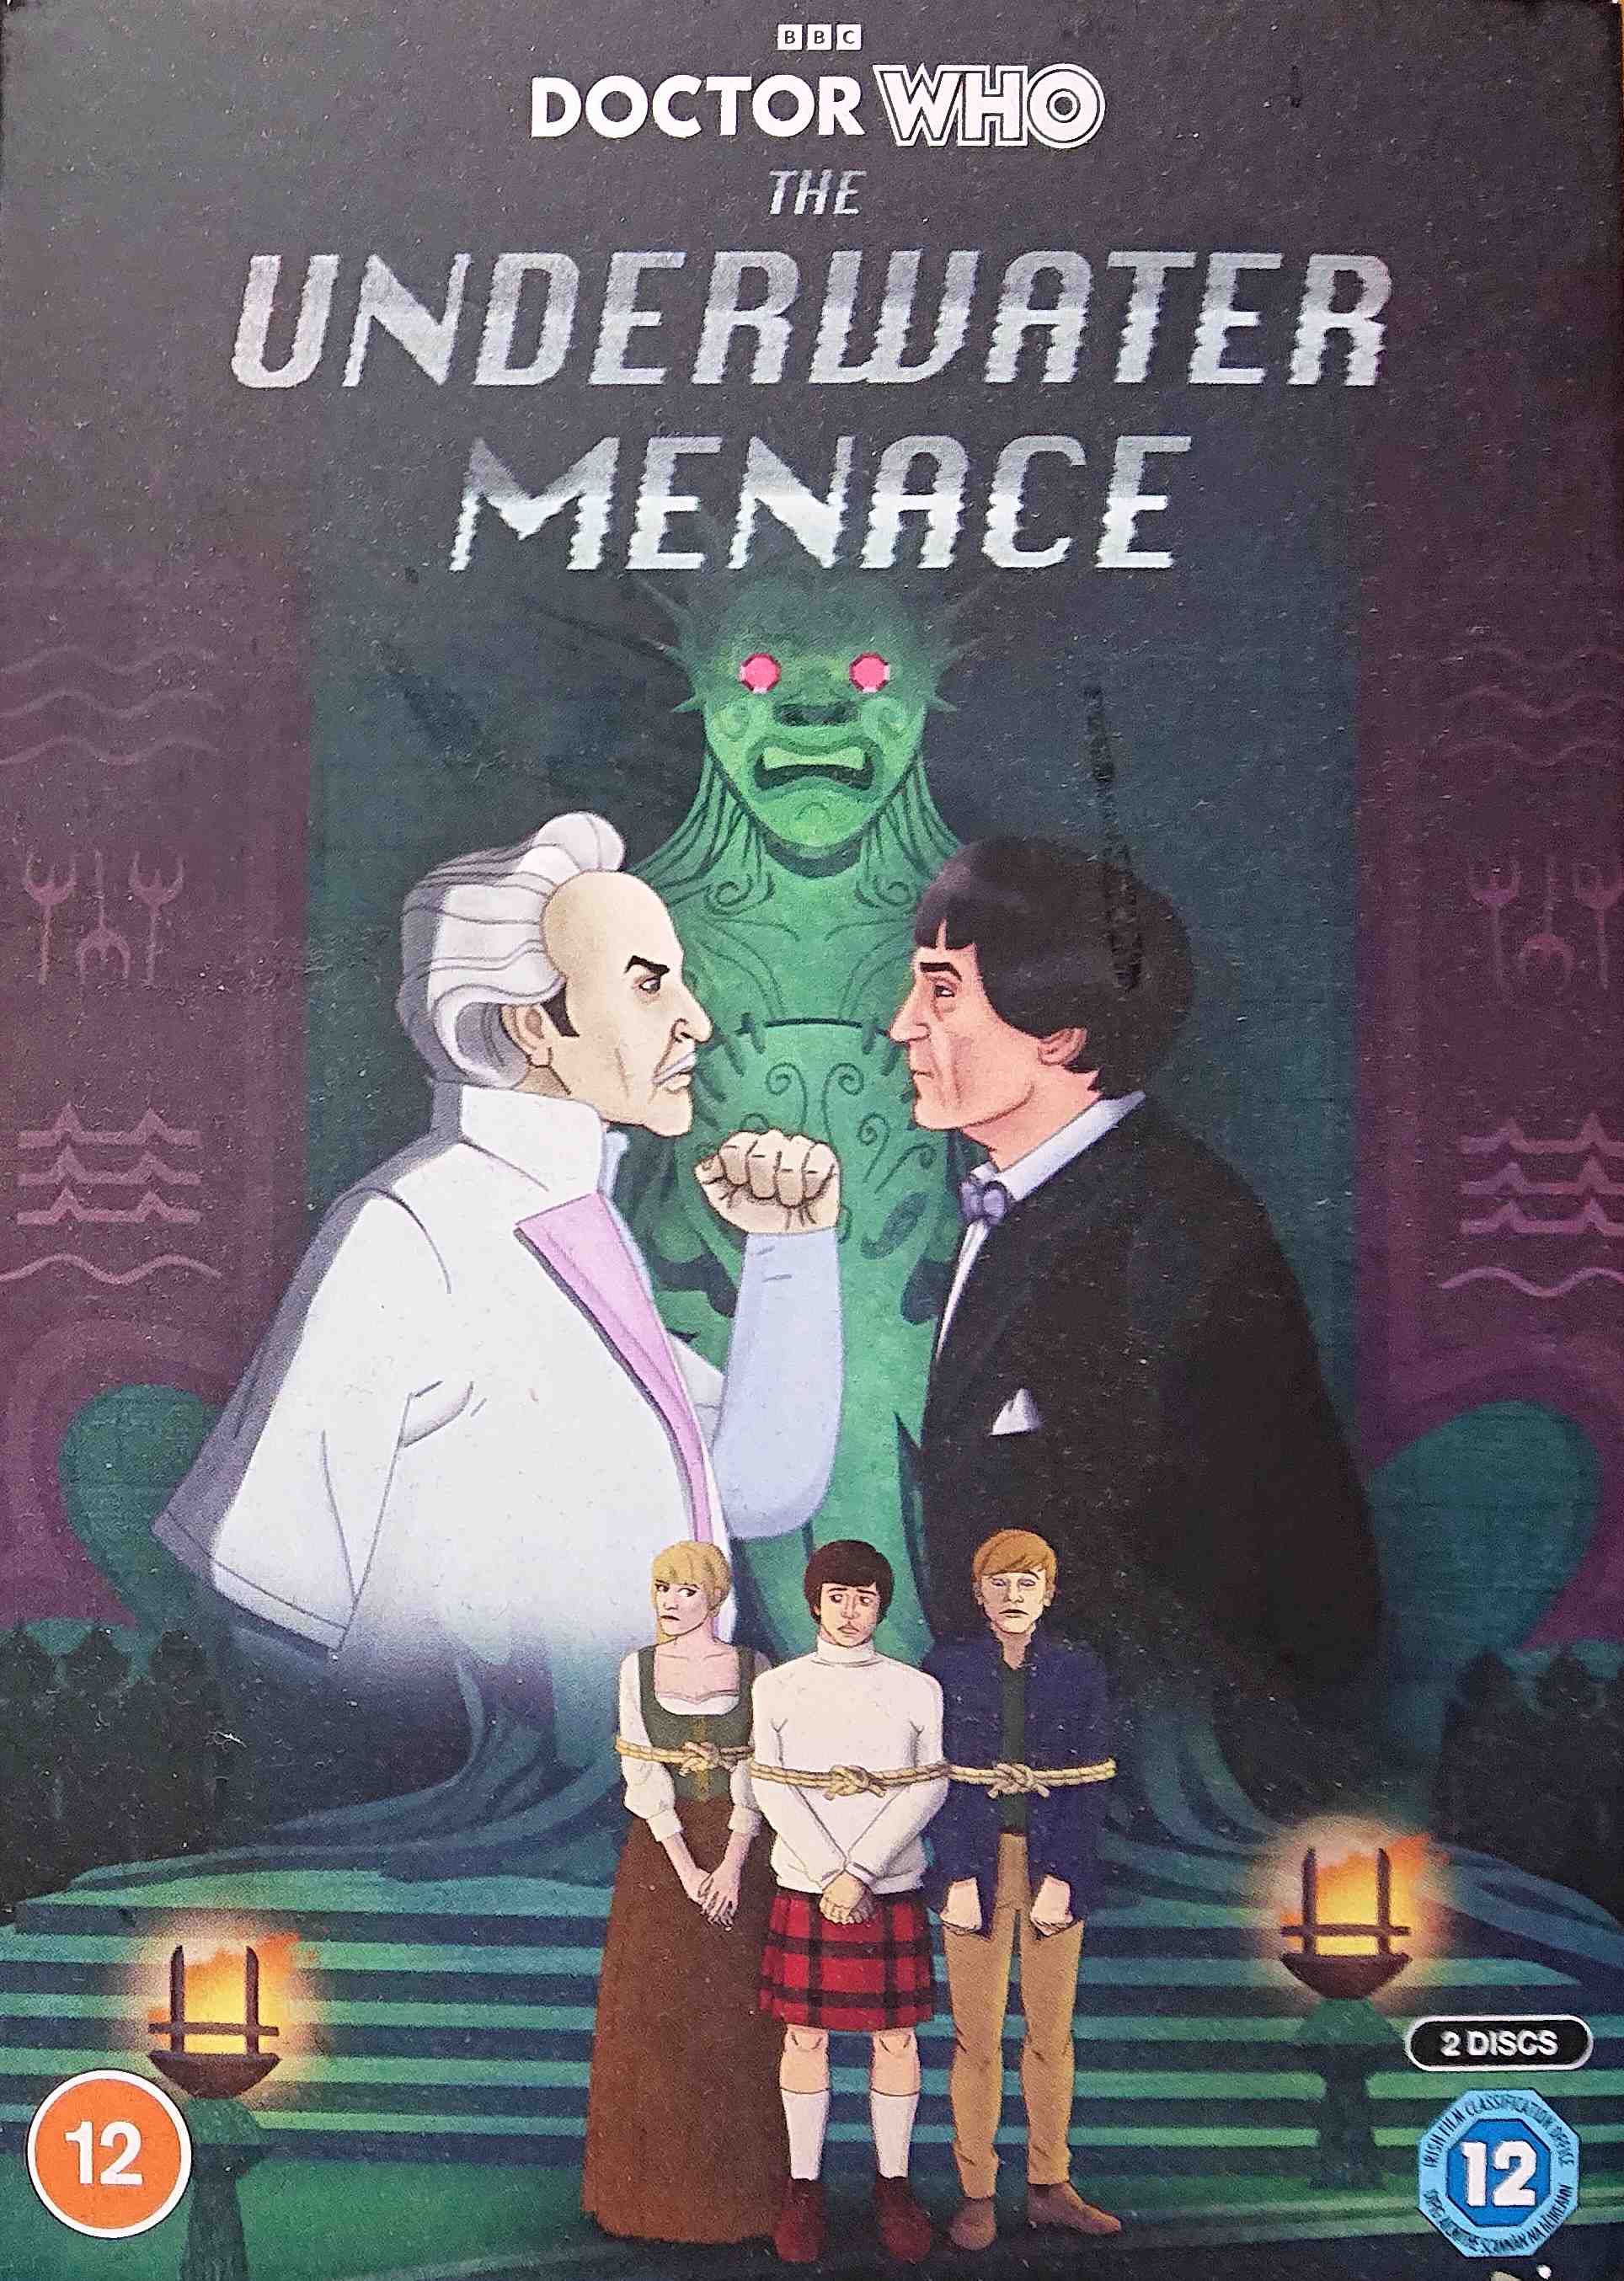 Picture of BBCDVD 4560 Doctor Who - The underwater menace by artist Geoffrey Orme